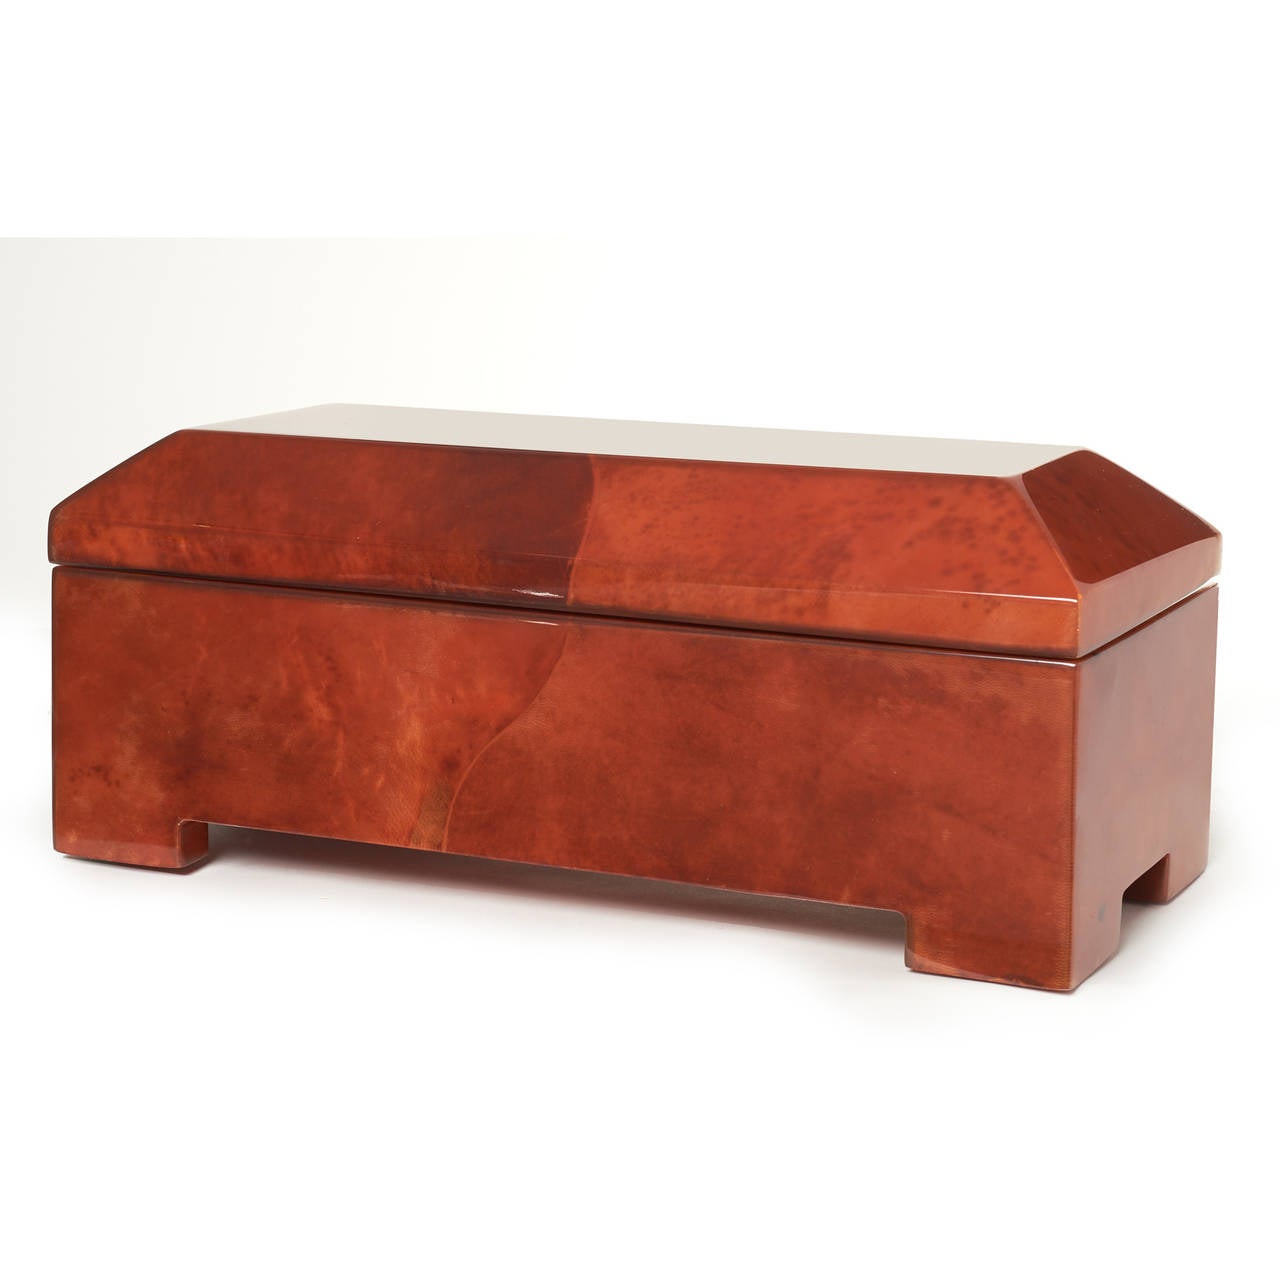 Hollywood Regency Blood Red Parchment Wrapped Casket Jewelry Box by Maitland-Smith